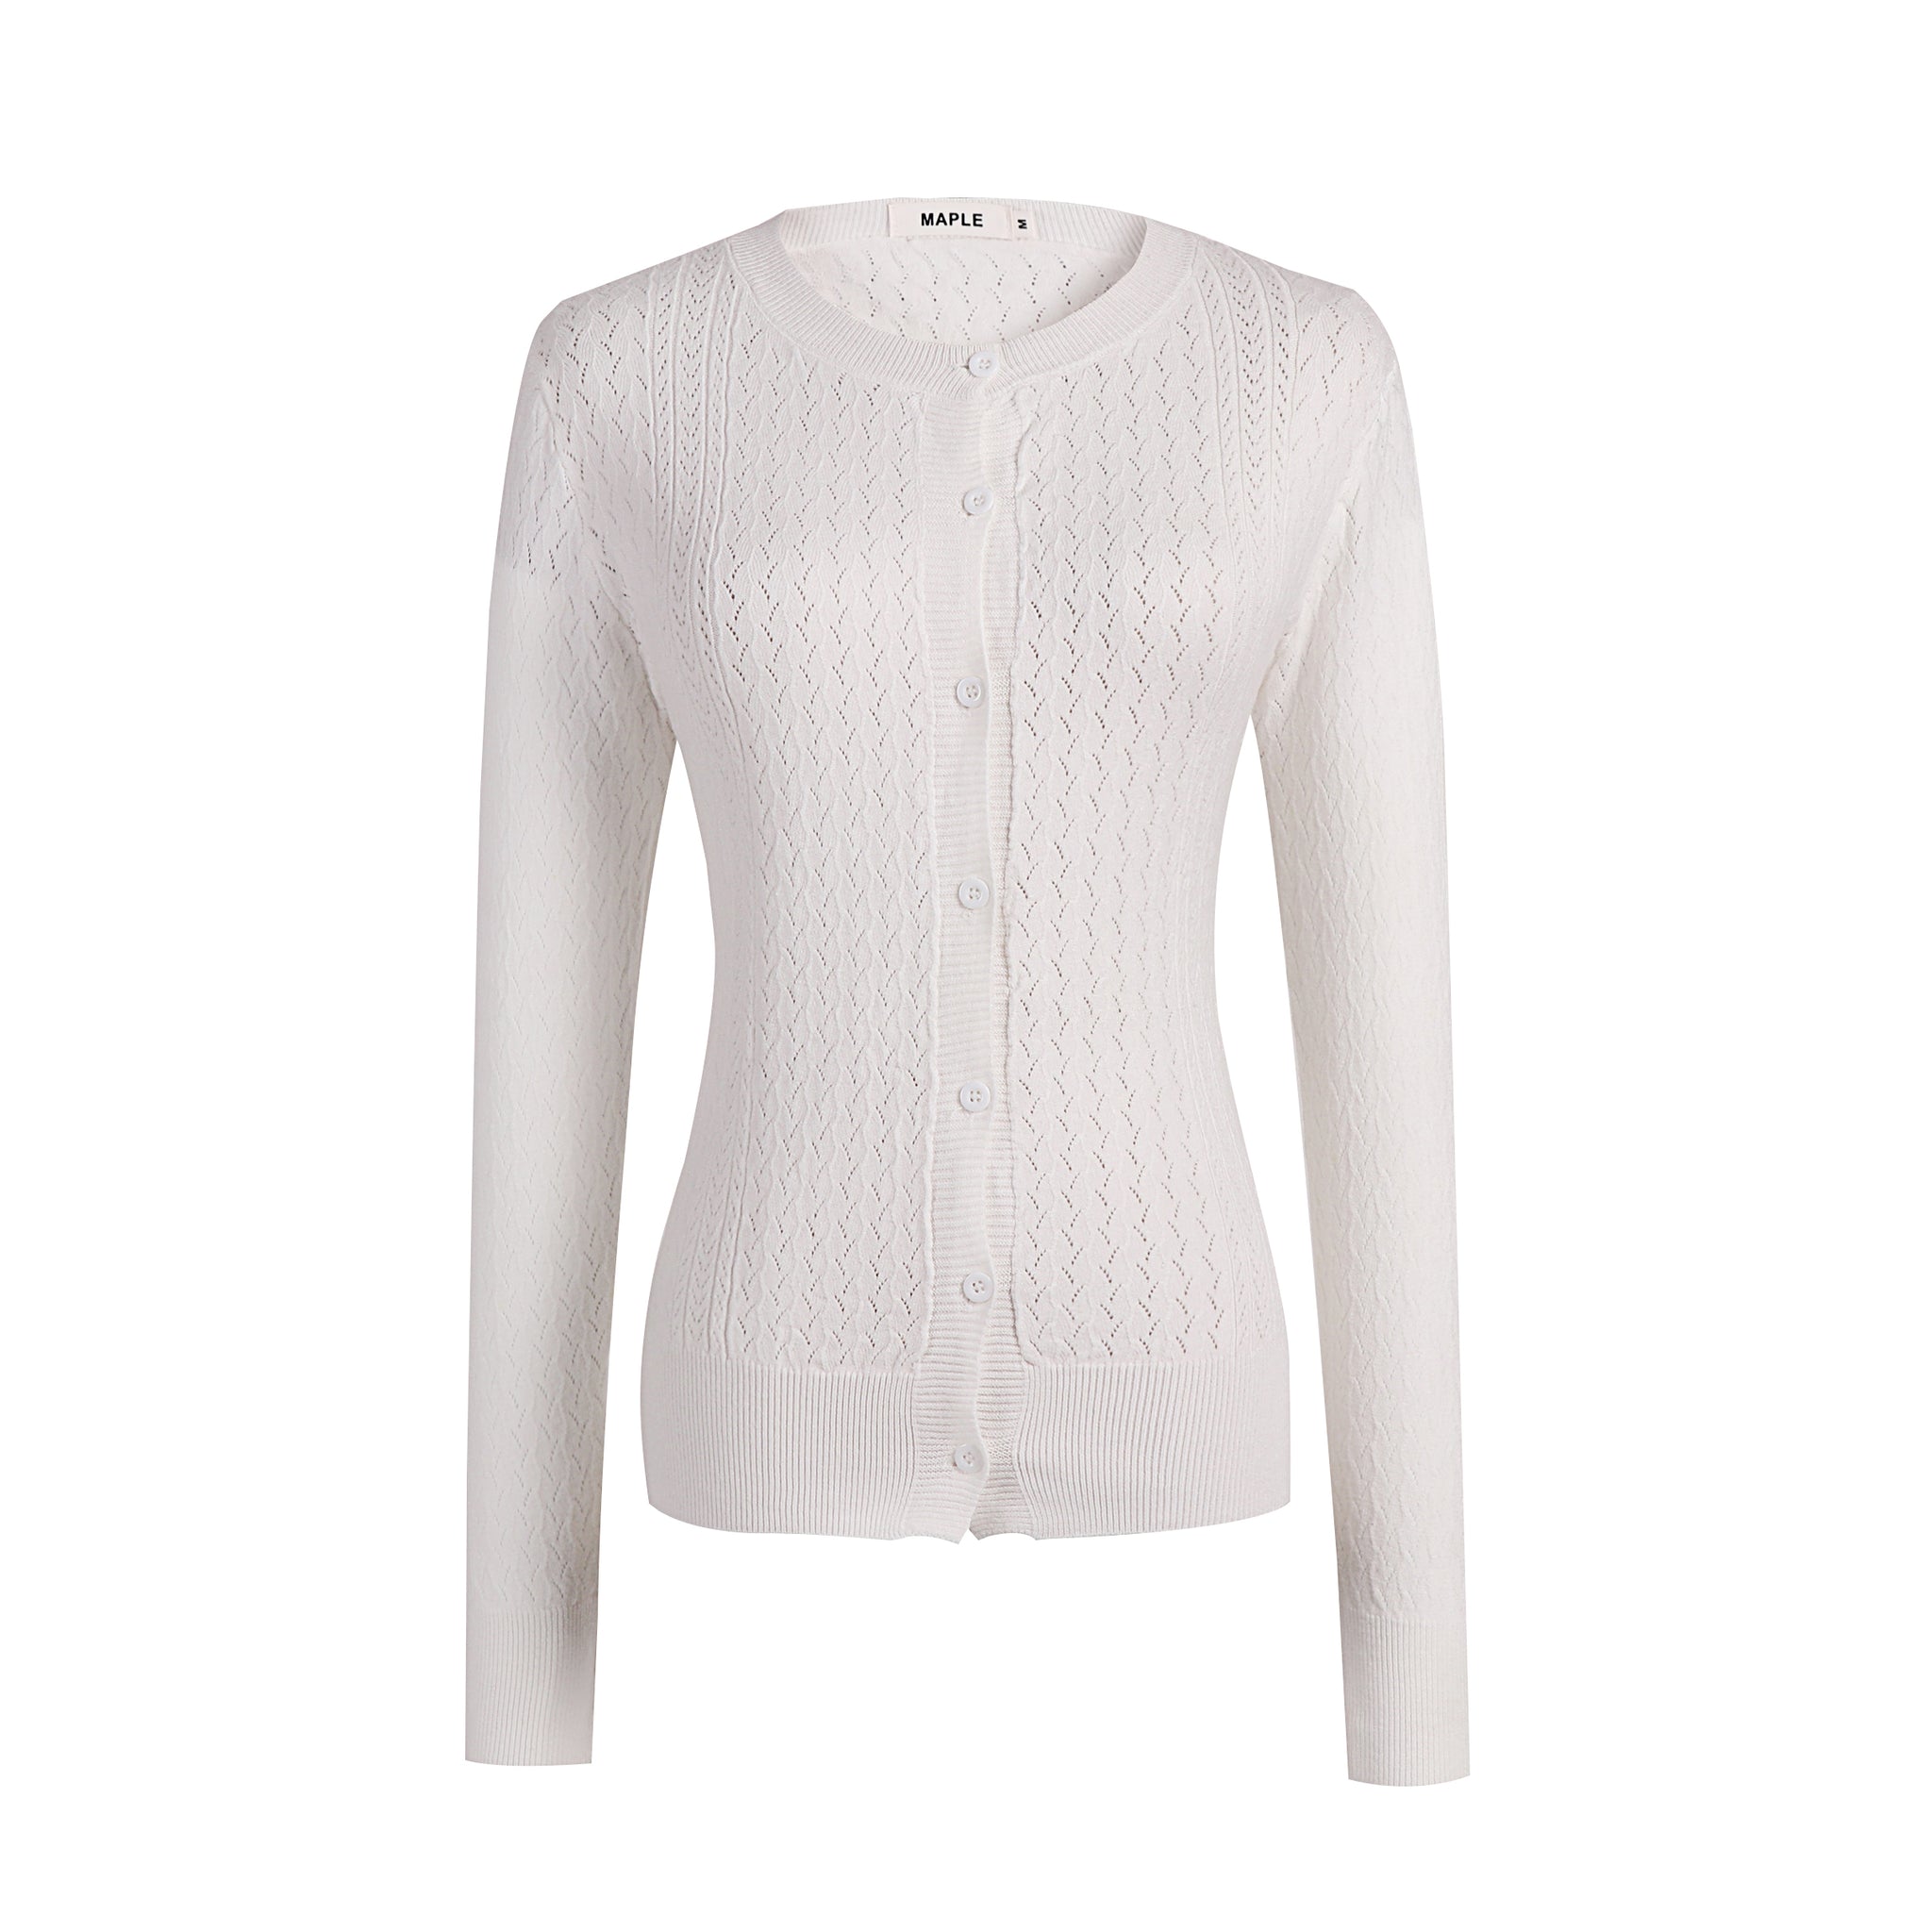 Women's White Cardigan with Texture Pattern